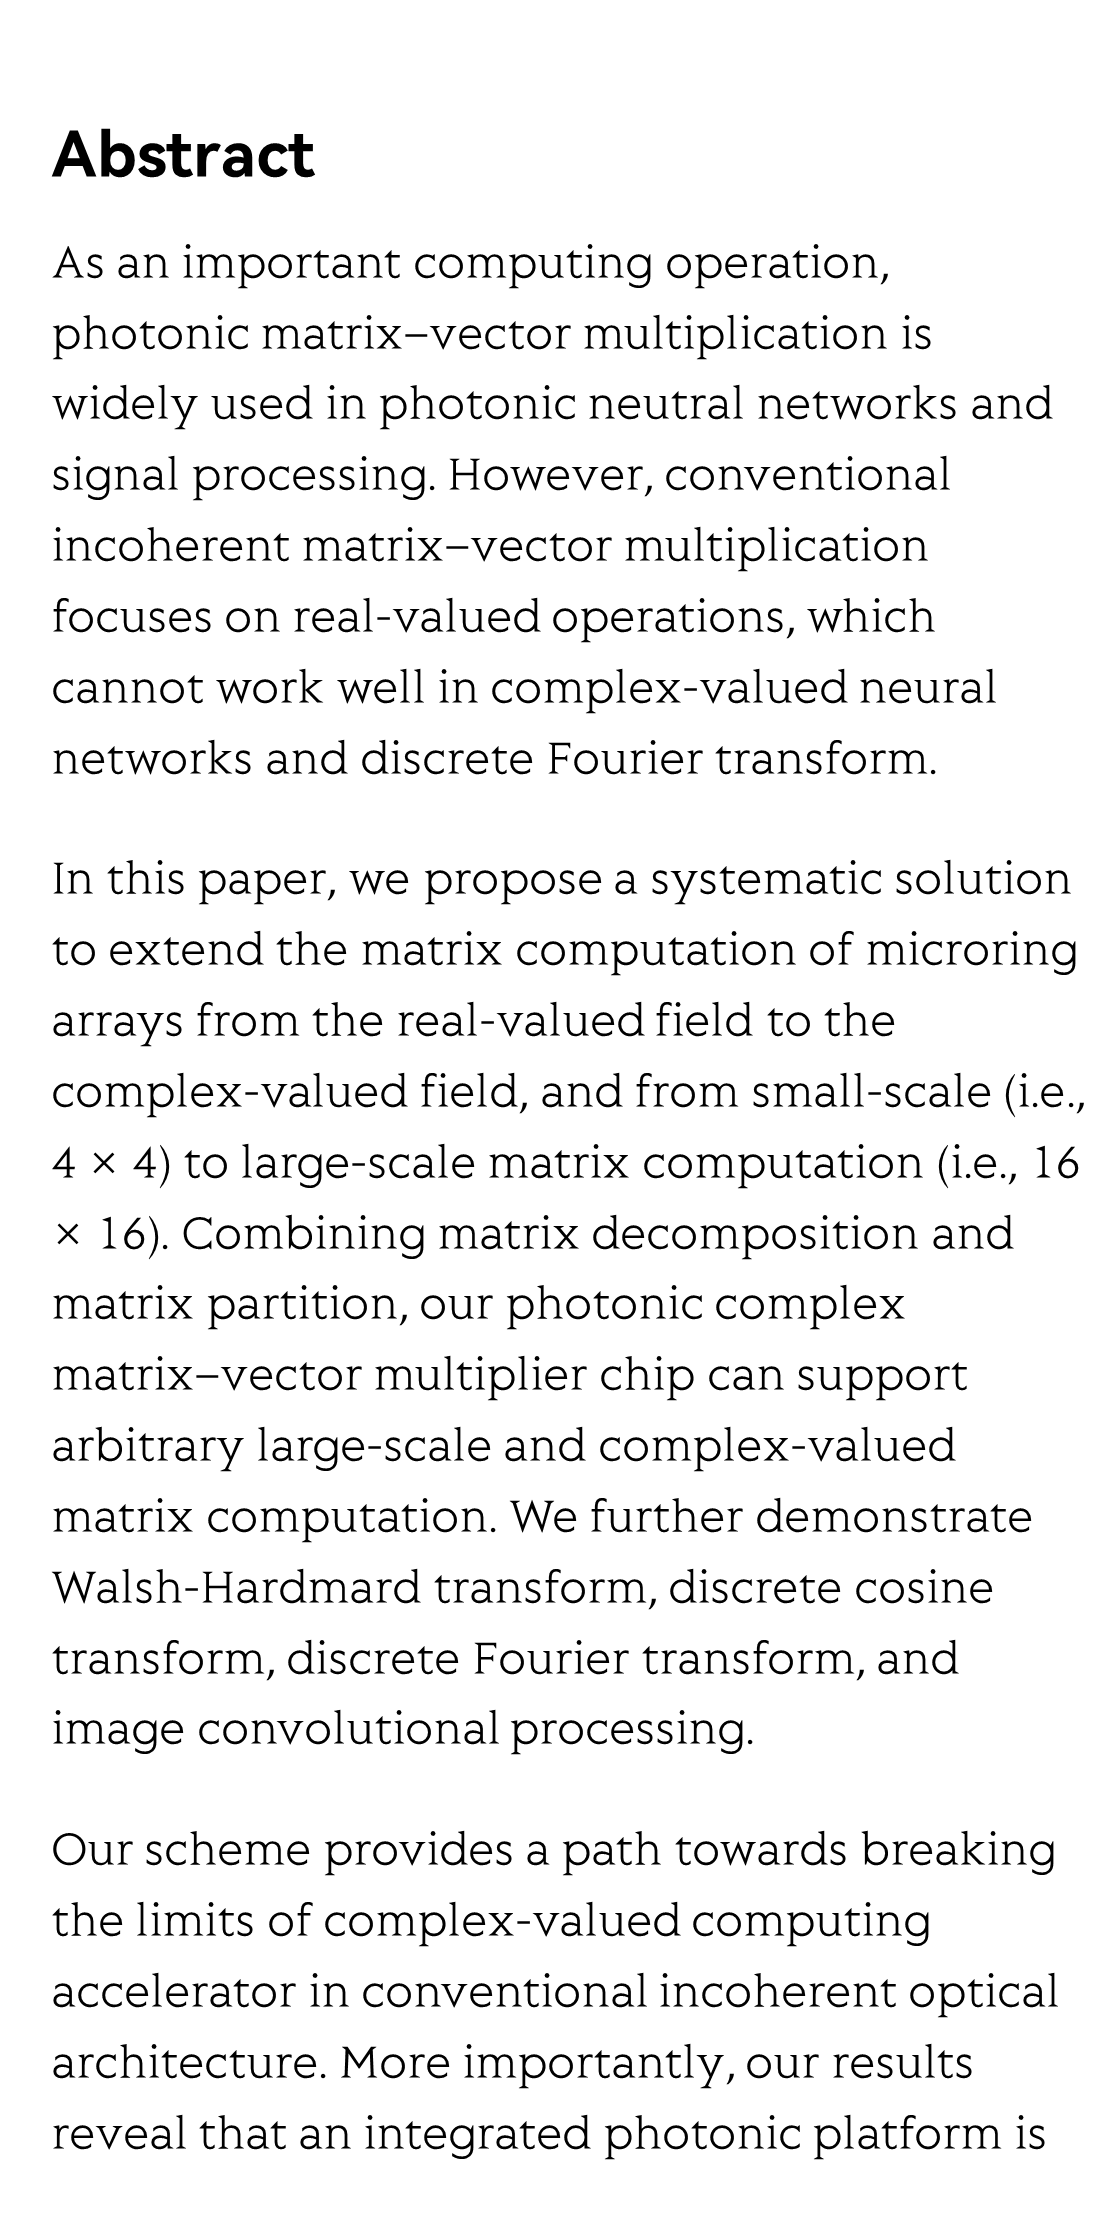 A small microring array that performs large complex-valued matrix-vector multiplication_2